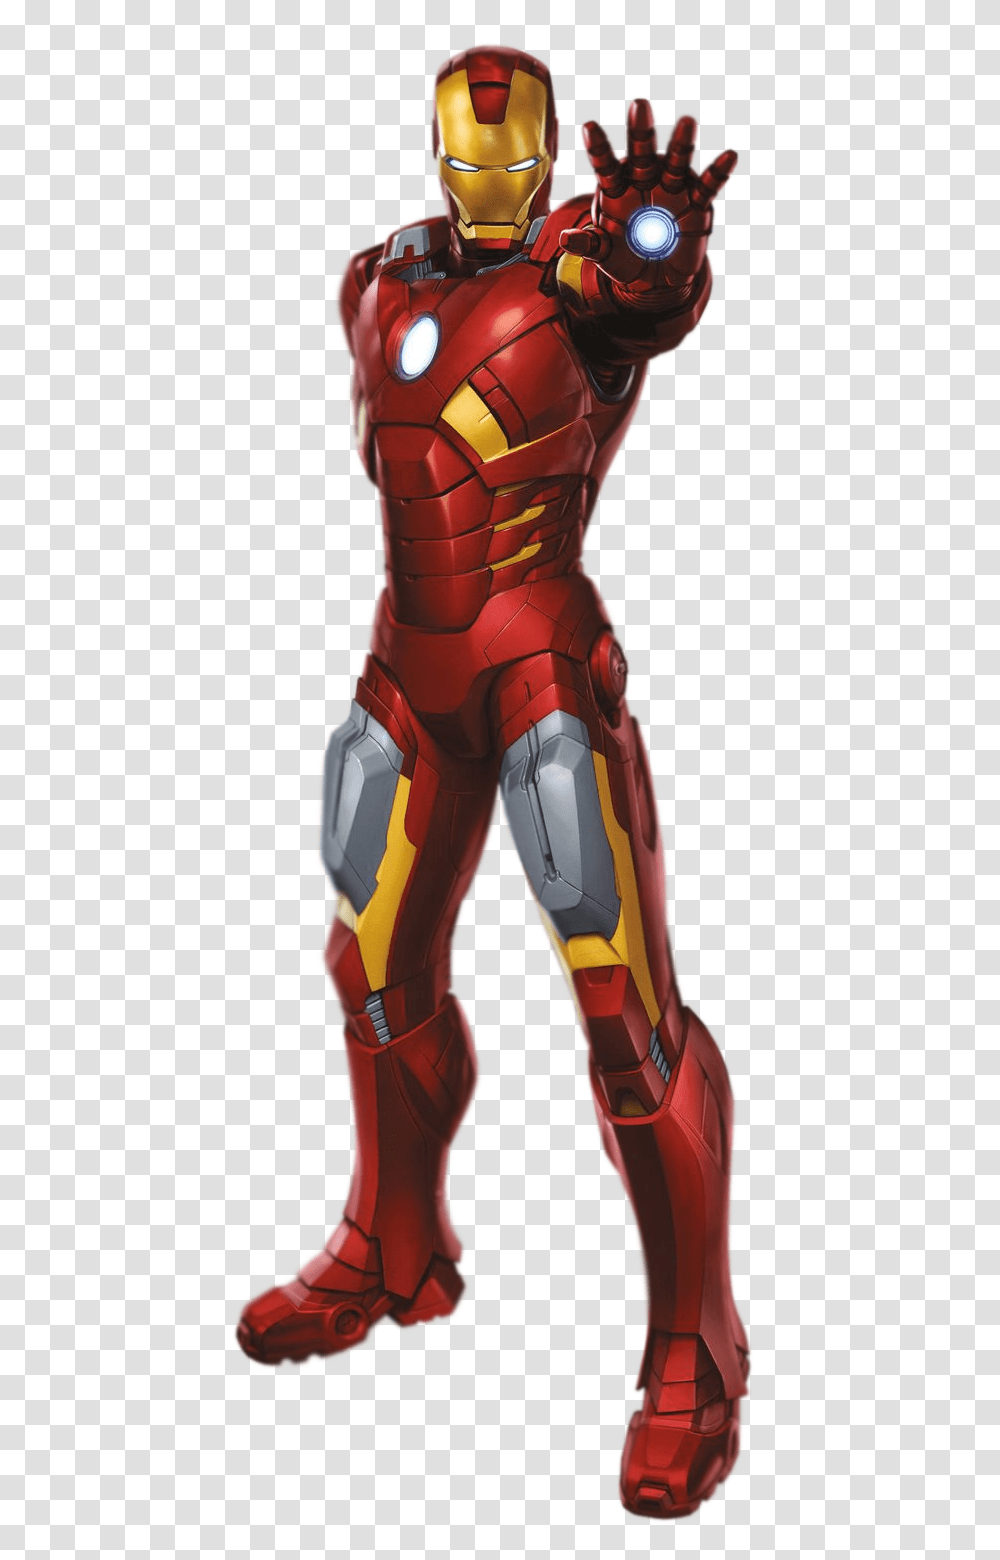 Download Ironman Image For Free Iron Man Hd, Costume, Armor, Toy, Person Transparent Png